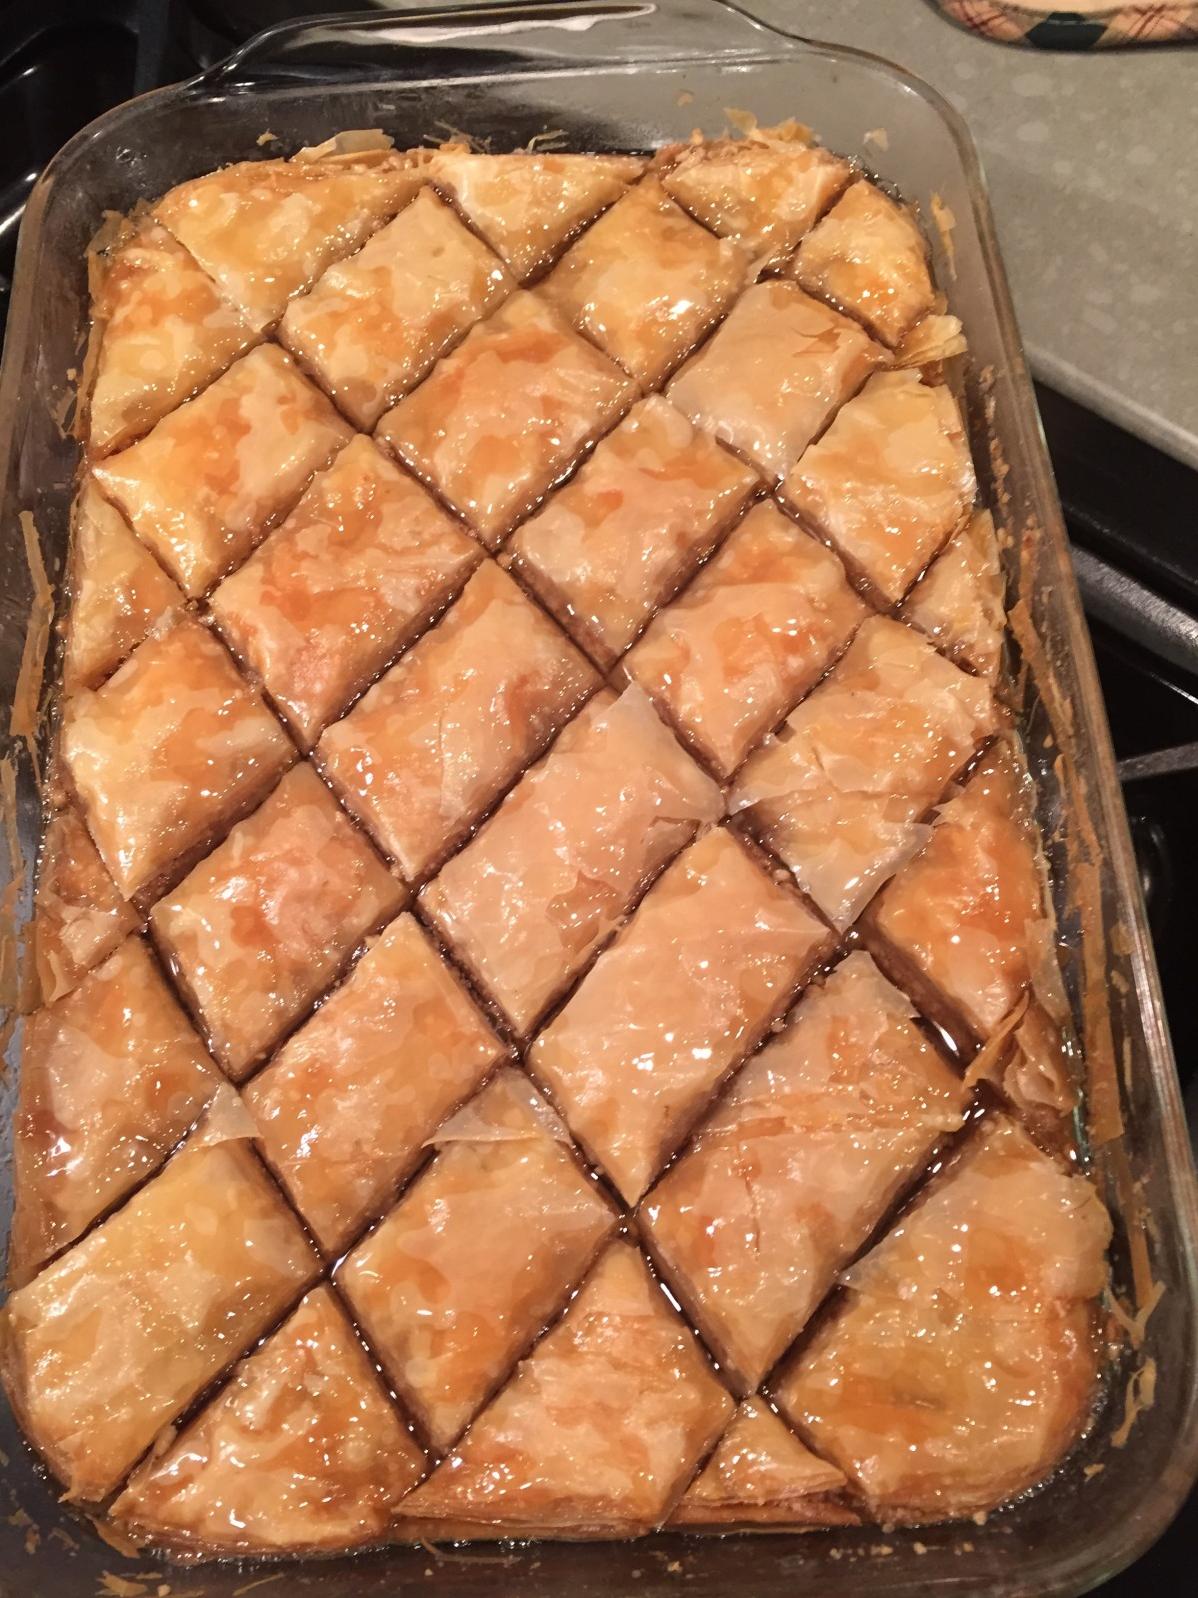  Layers upon layers of flaky phyllo dough